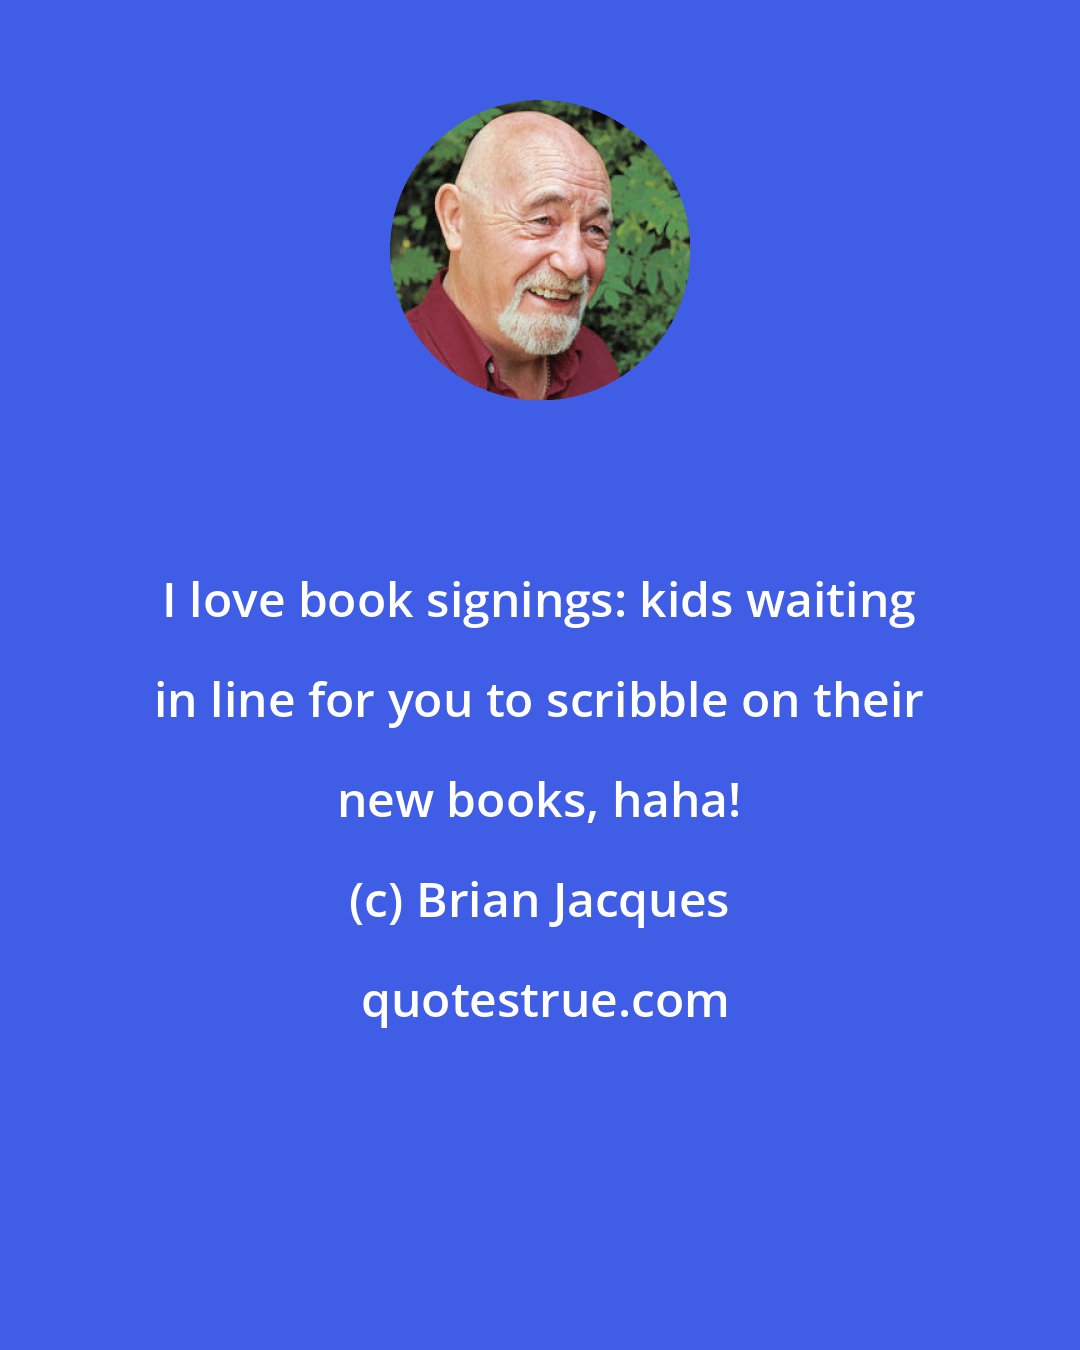 Brian Jacques: I love book signings: kids waiting in line for you to scribble on their new books, haha!